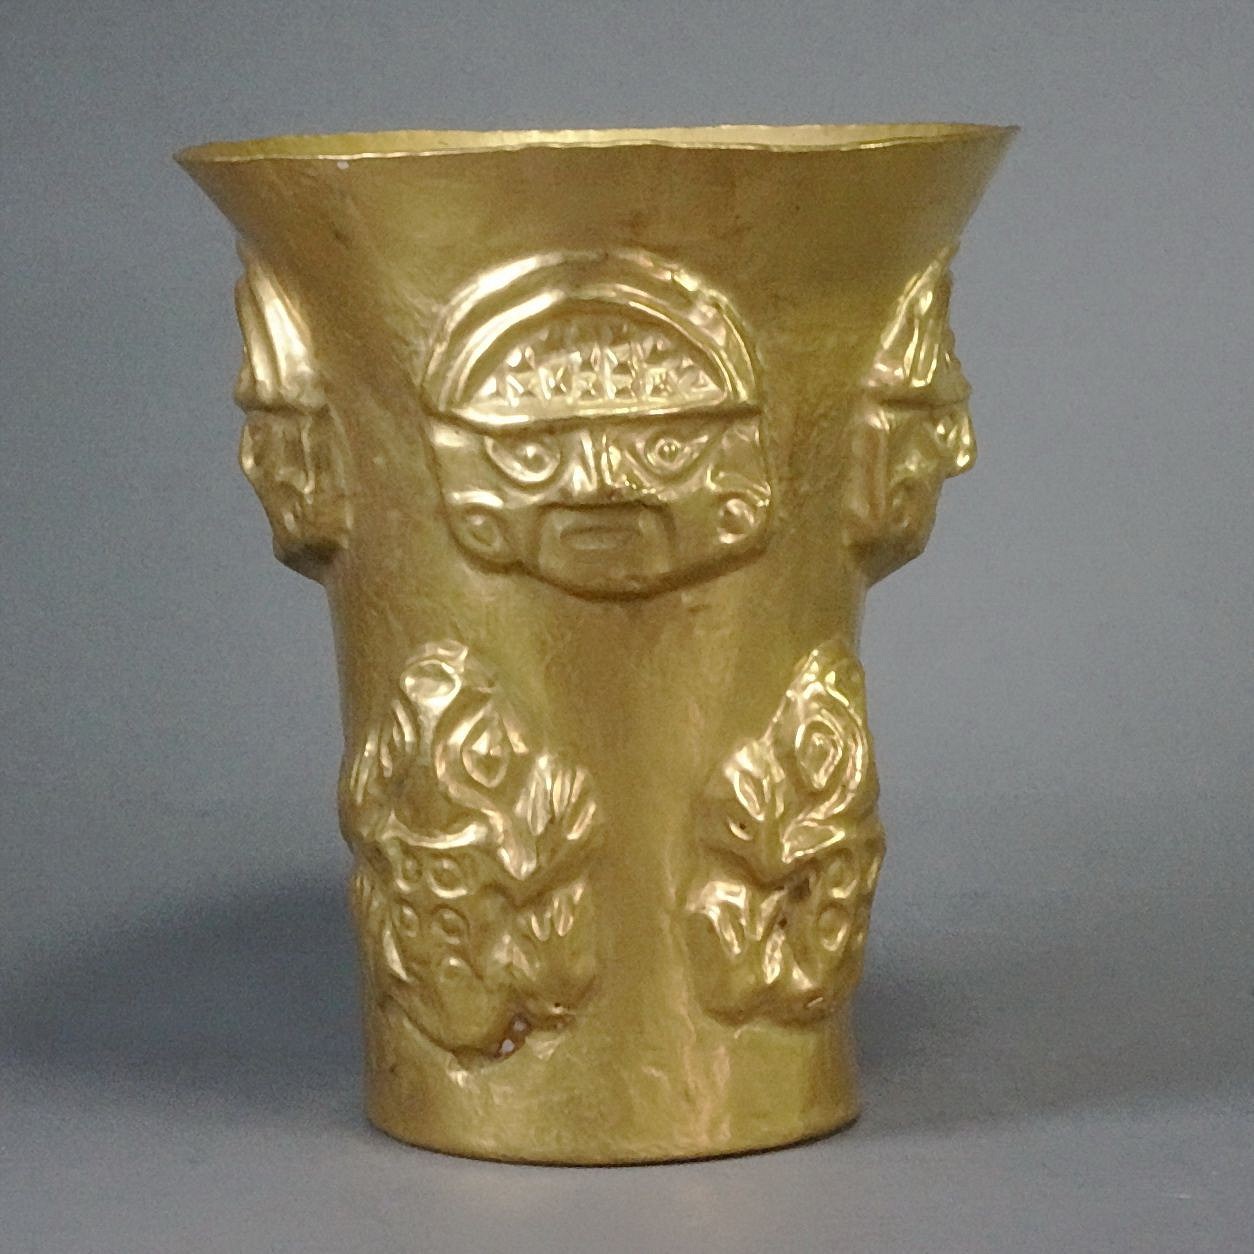 Peru, Sican Gold Beaker with Mask and Frog Motif
The Sican cache of gold came from the largest burial in the Americas at hacienda Batan Grande near the Chimu City of Chan Chan.  These beakers were used to drink the ceremonial Chicha (Corn Beer).  The masks and flared beakers were the most notable objects from this burial.   The beakers came in various designs from frogs to Warriors.   This beaker is unusual in that it has both masks and frog motifs.   Illustrated in THE ART OF PRECOLUMBIAN GOLD, pg.227 the on the right. Exhibited in 1964, Los Angles # 202. Ex-Jan Mitchell collection, prior to 1980.
Media: Metal
Dimensions: Height: 5. 1/8"  Diameter at top: 4 3/8"   Weight:  184 grams
&bull;SOLD
n7054